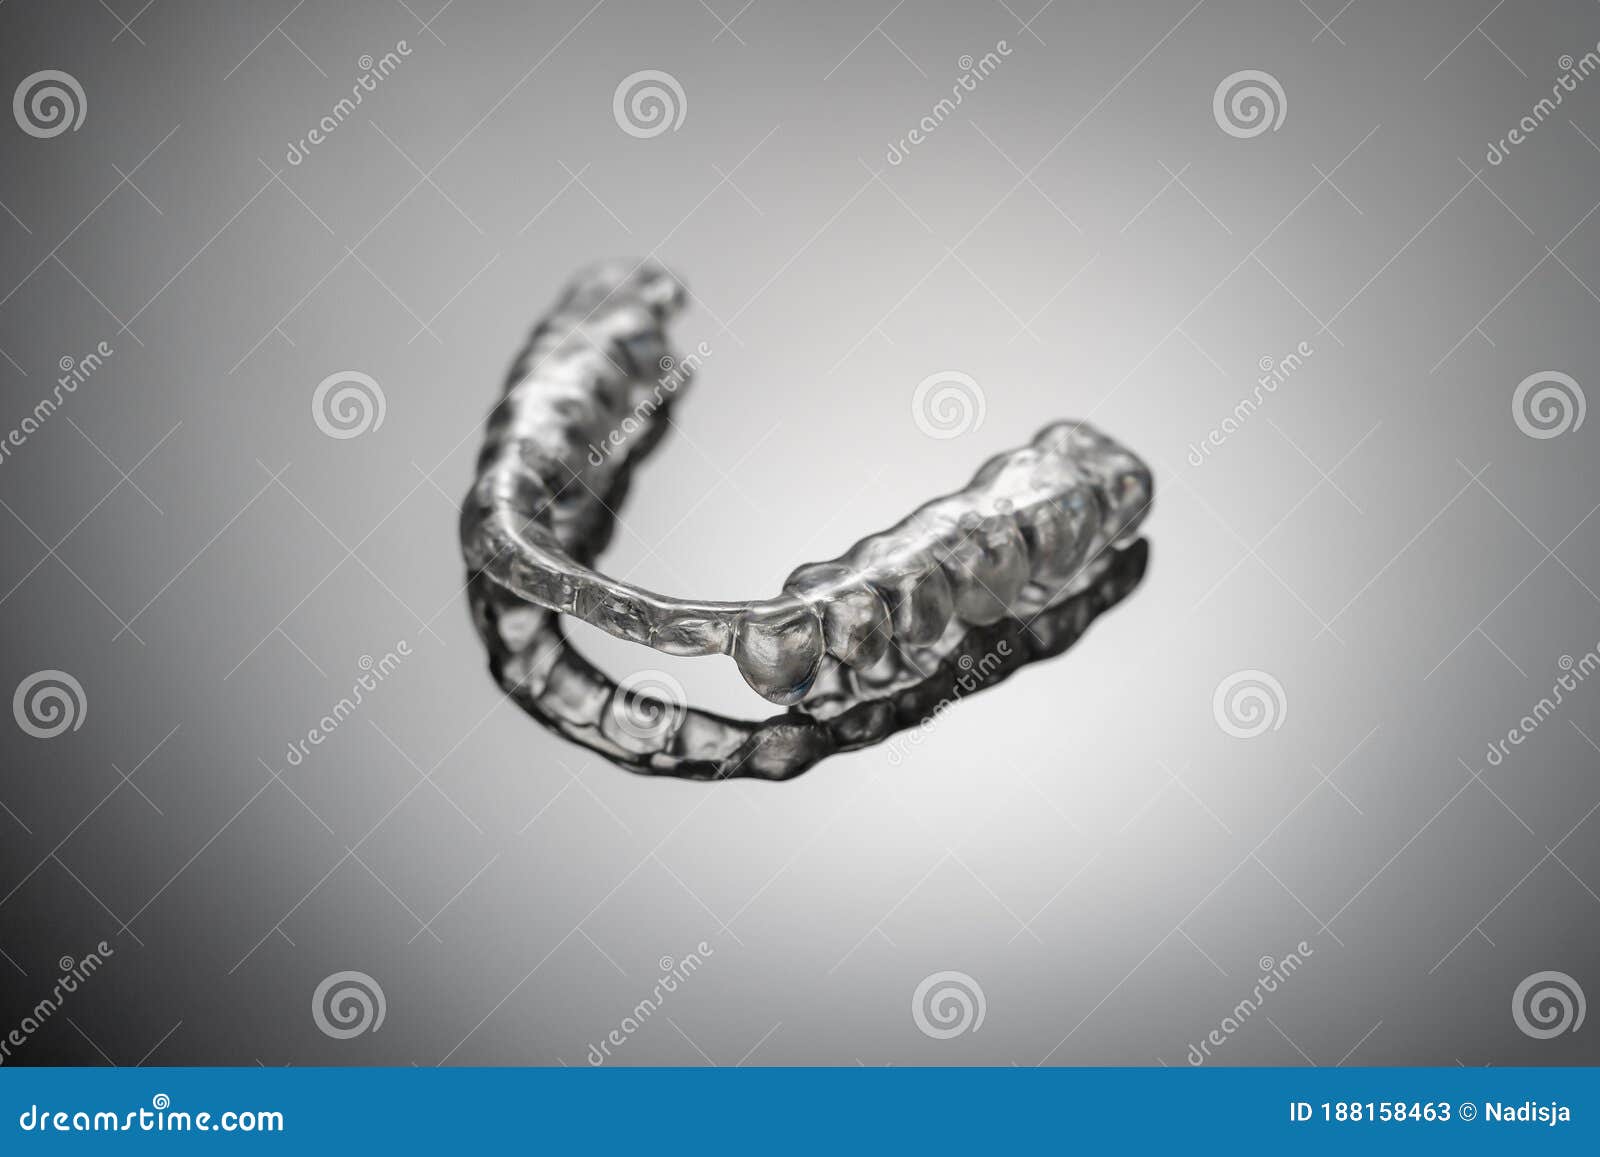 night dental guard by bruxism on gray background